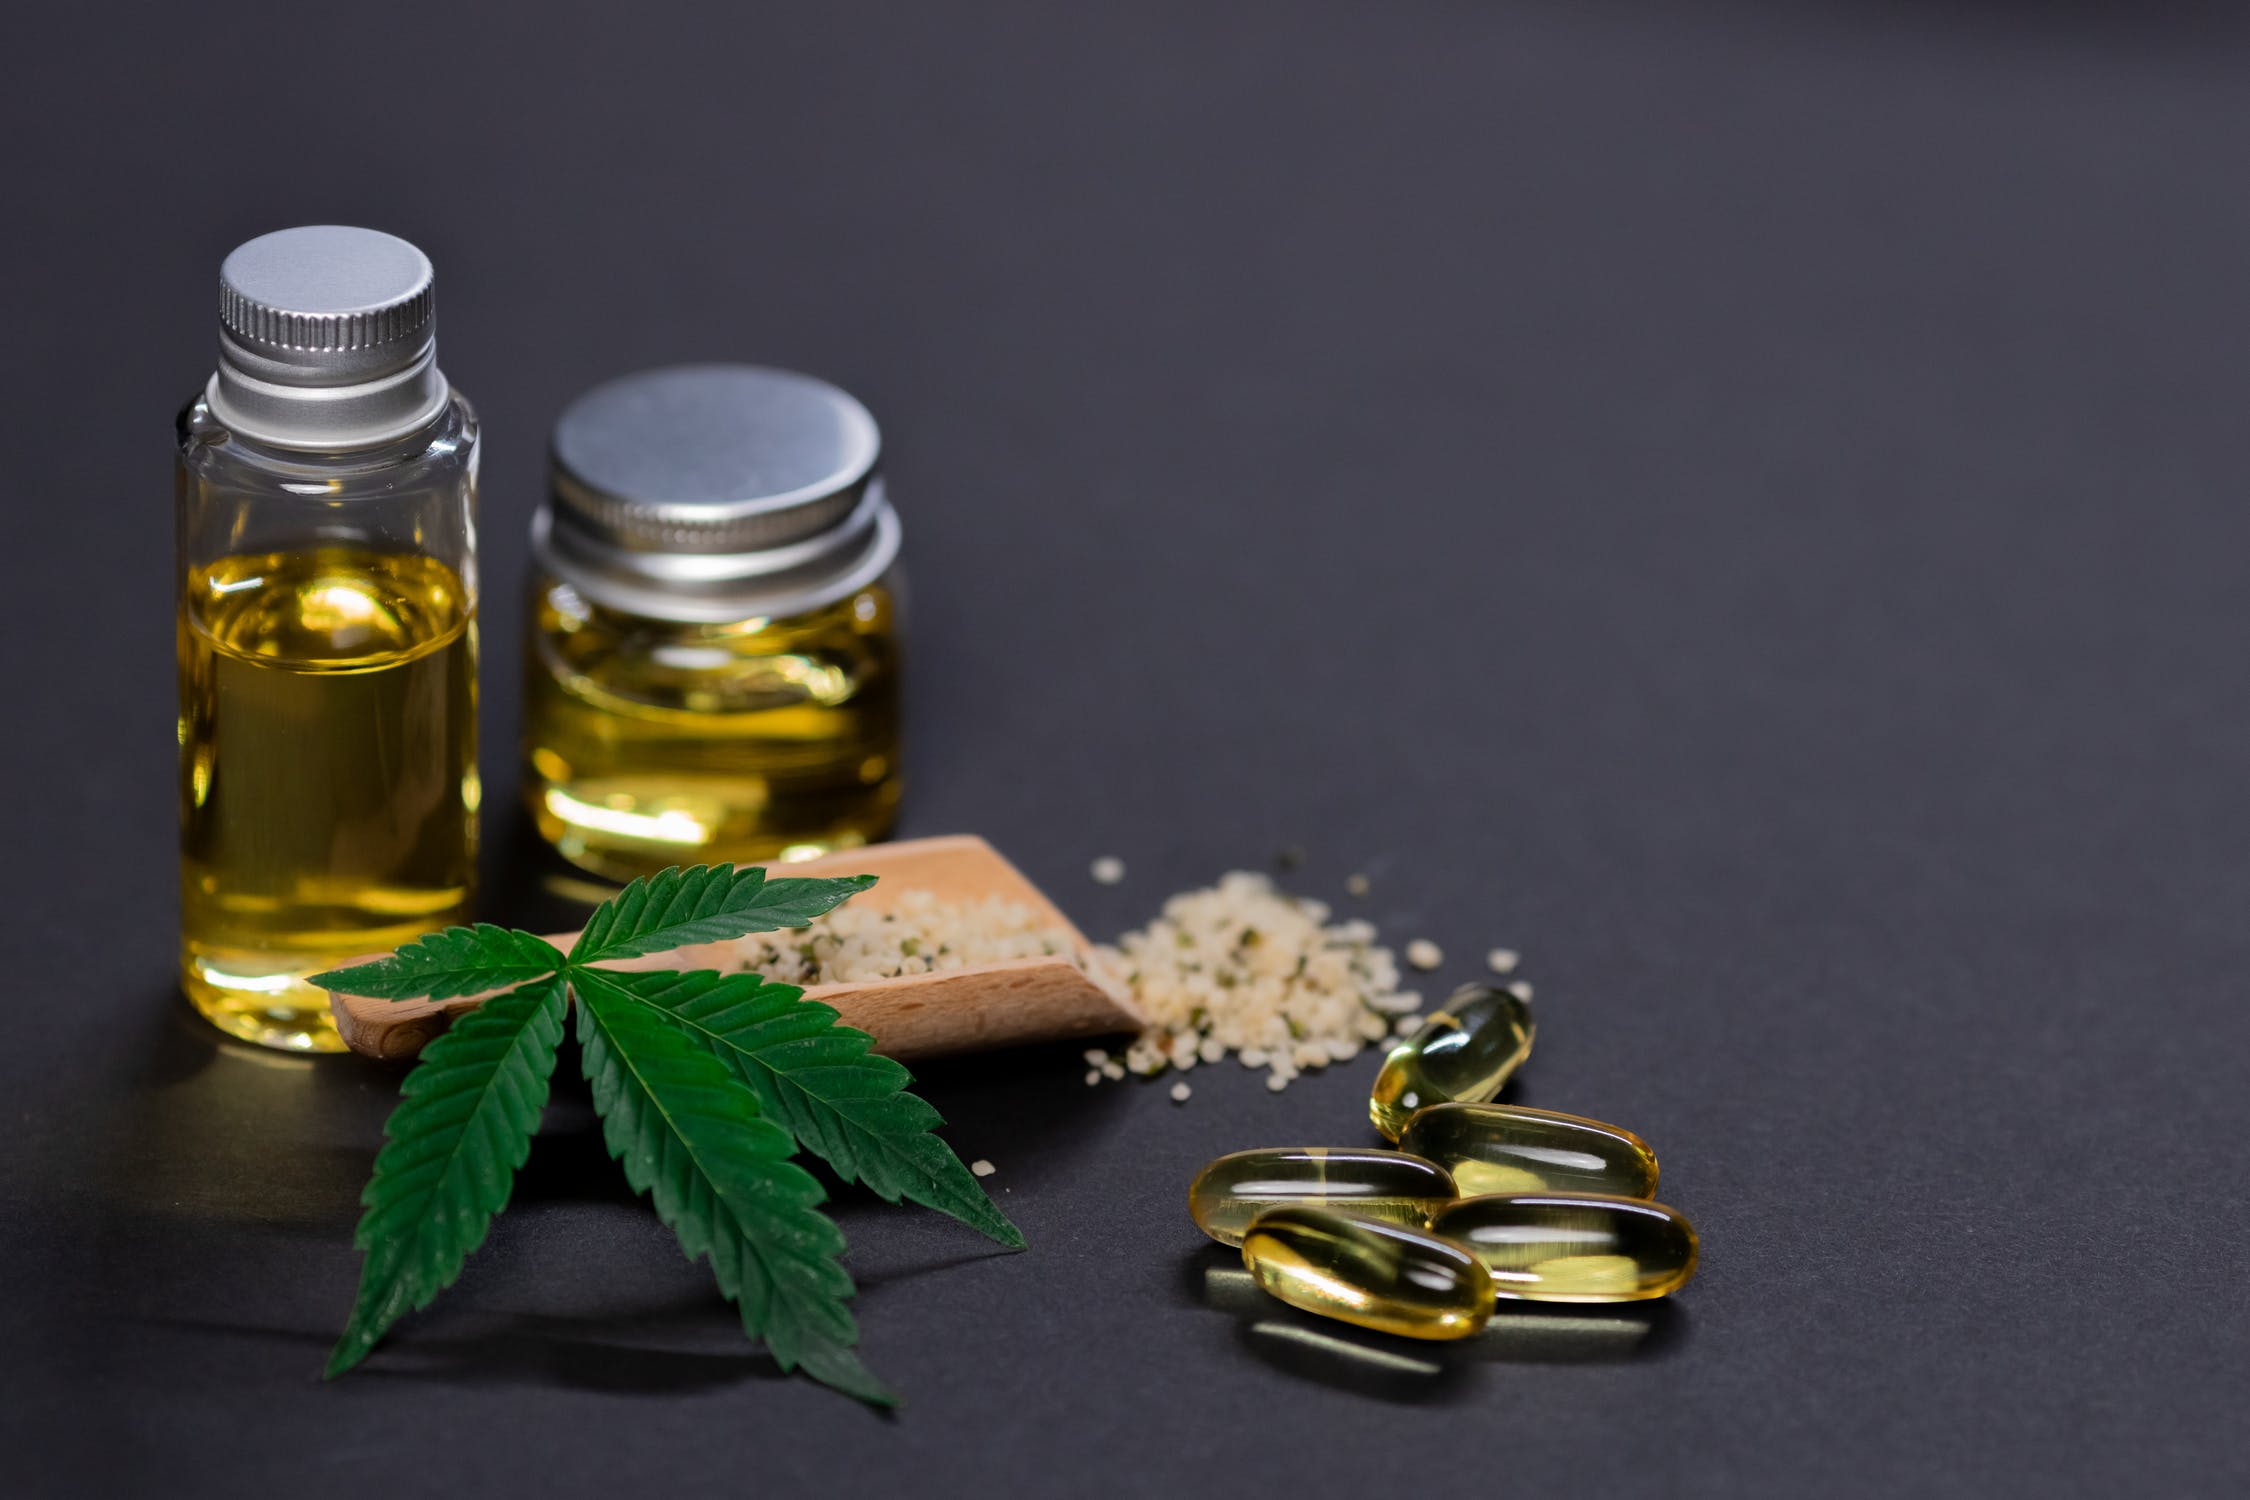 How Do You Use Medical Marijuana Extracts and Concentrates?